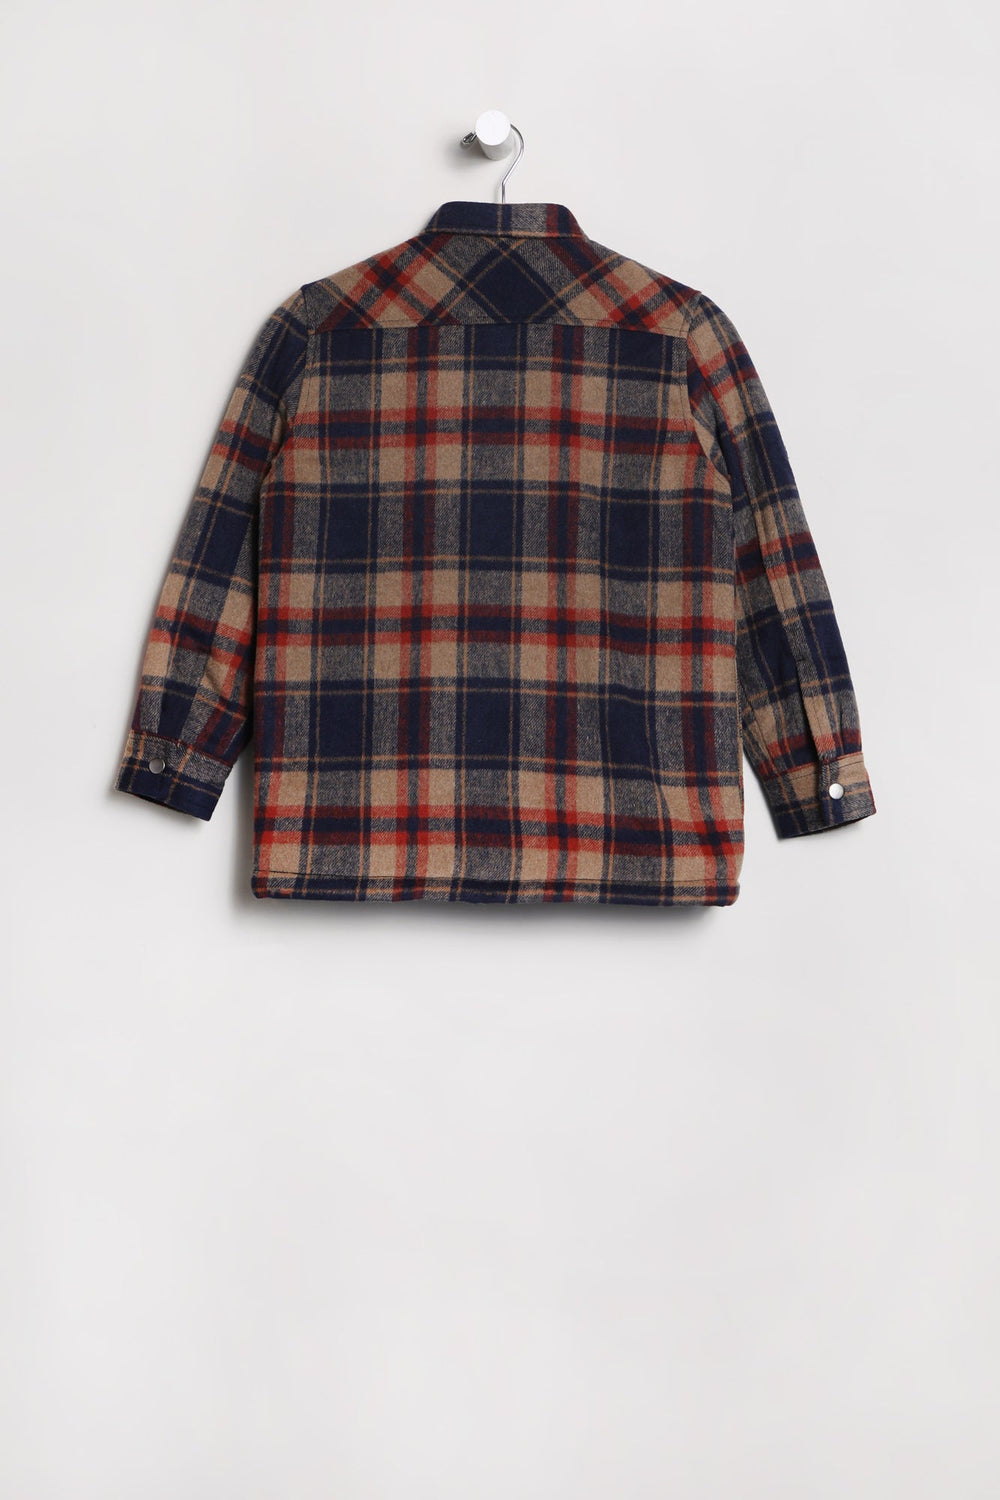 West49 Youth Sherpa Lined Flannel Shacket Brown